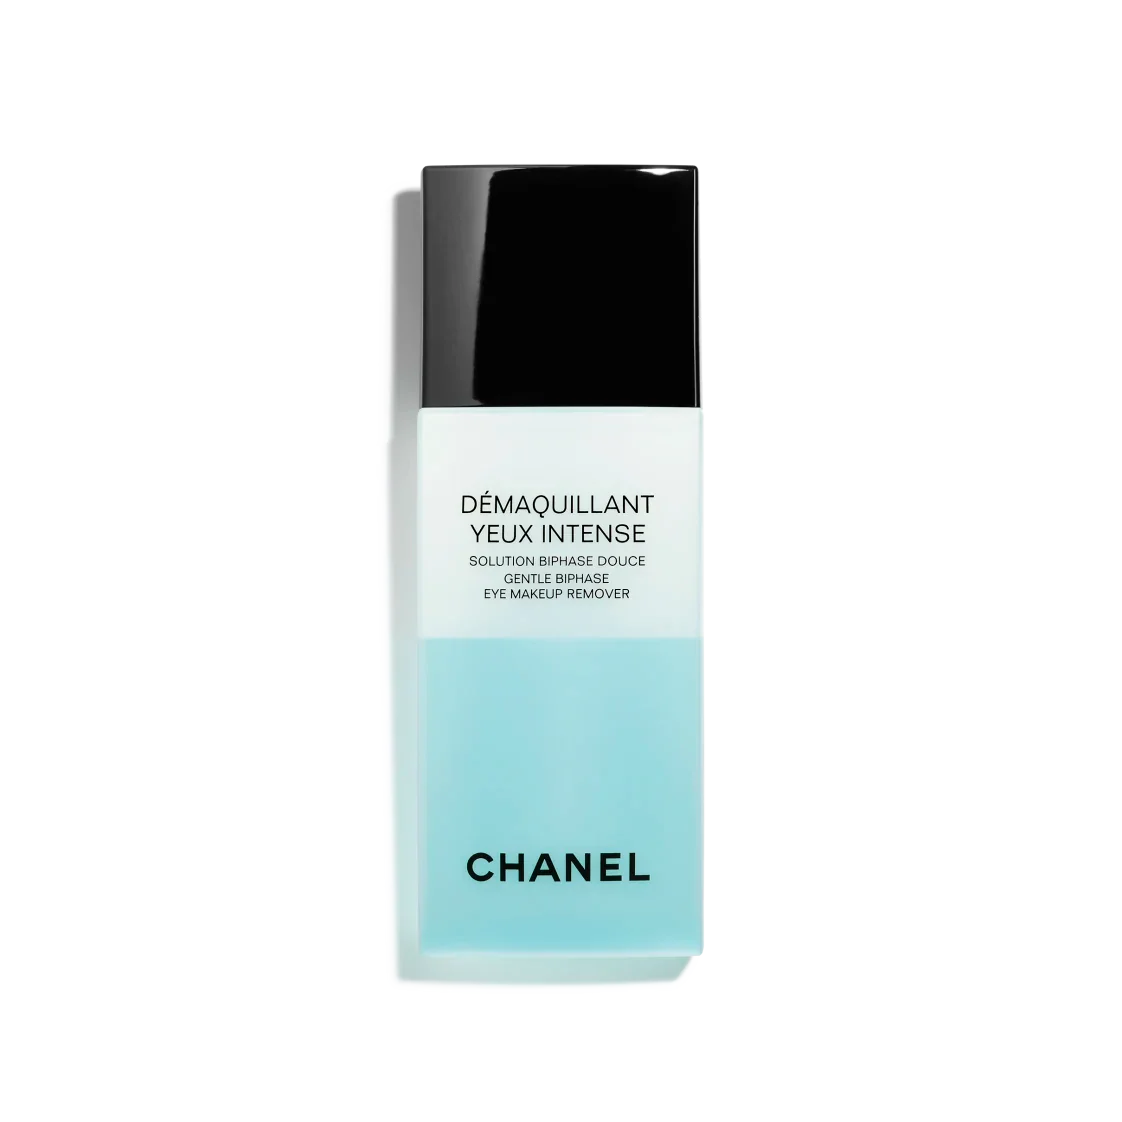 Chanel Demaquillant Yeux Intense Solution Biphase Douce 100 ml